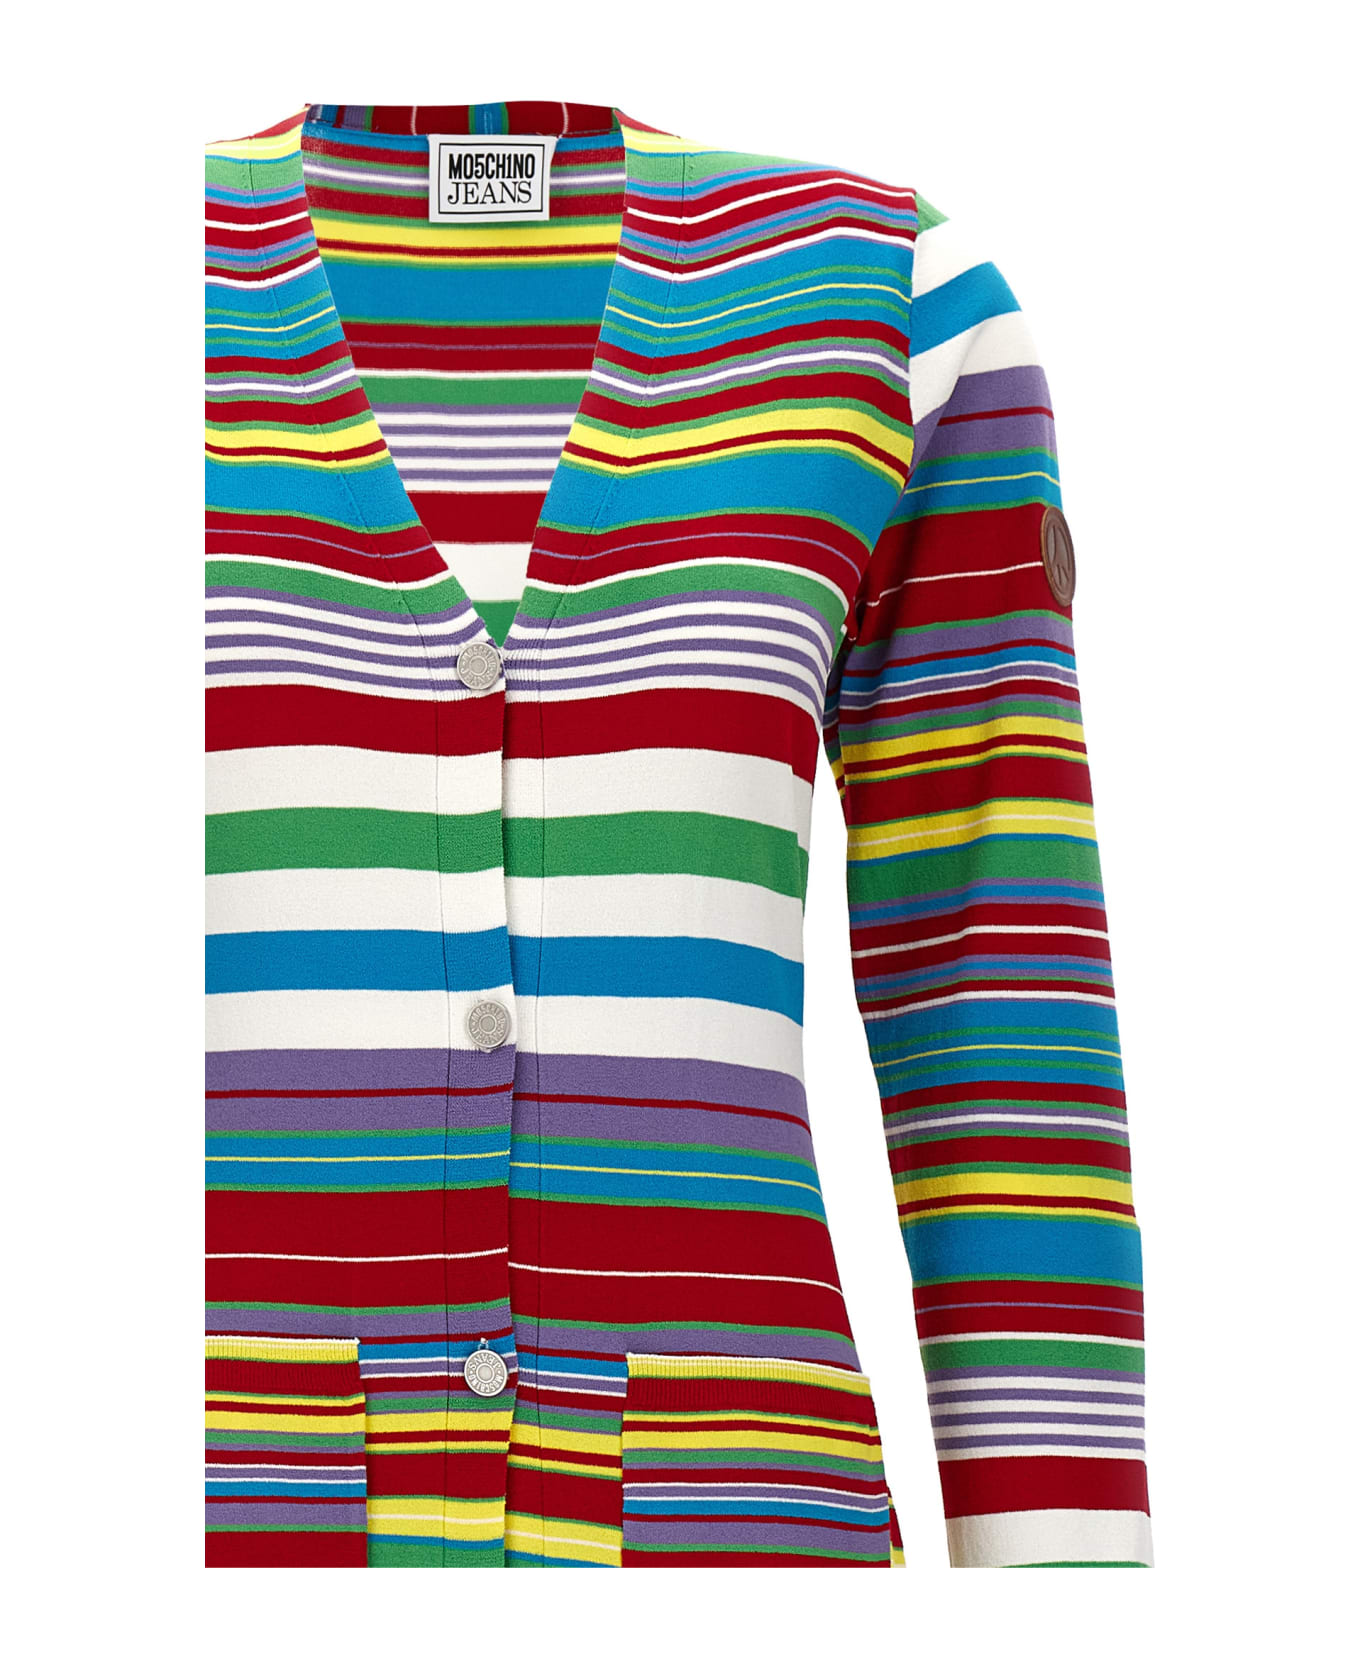 M05CH1N0 Jeans Striped Cardigan - Multicolor